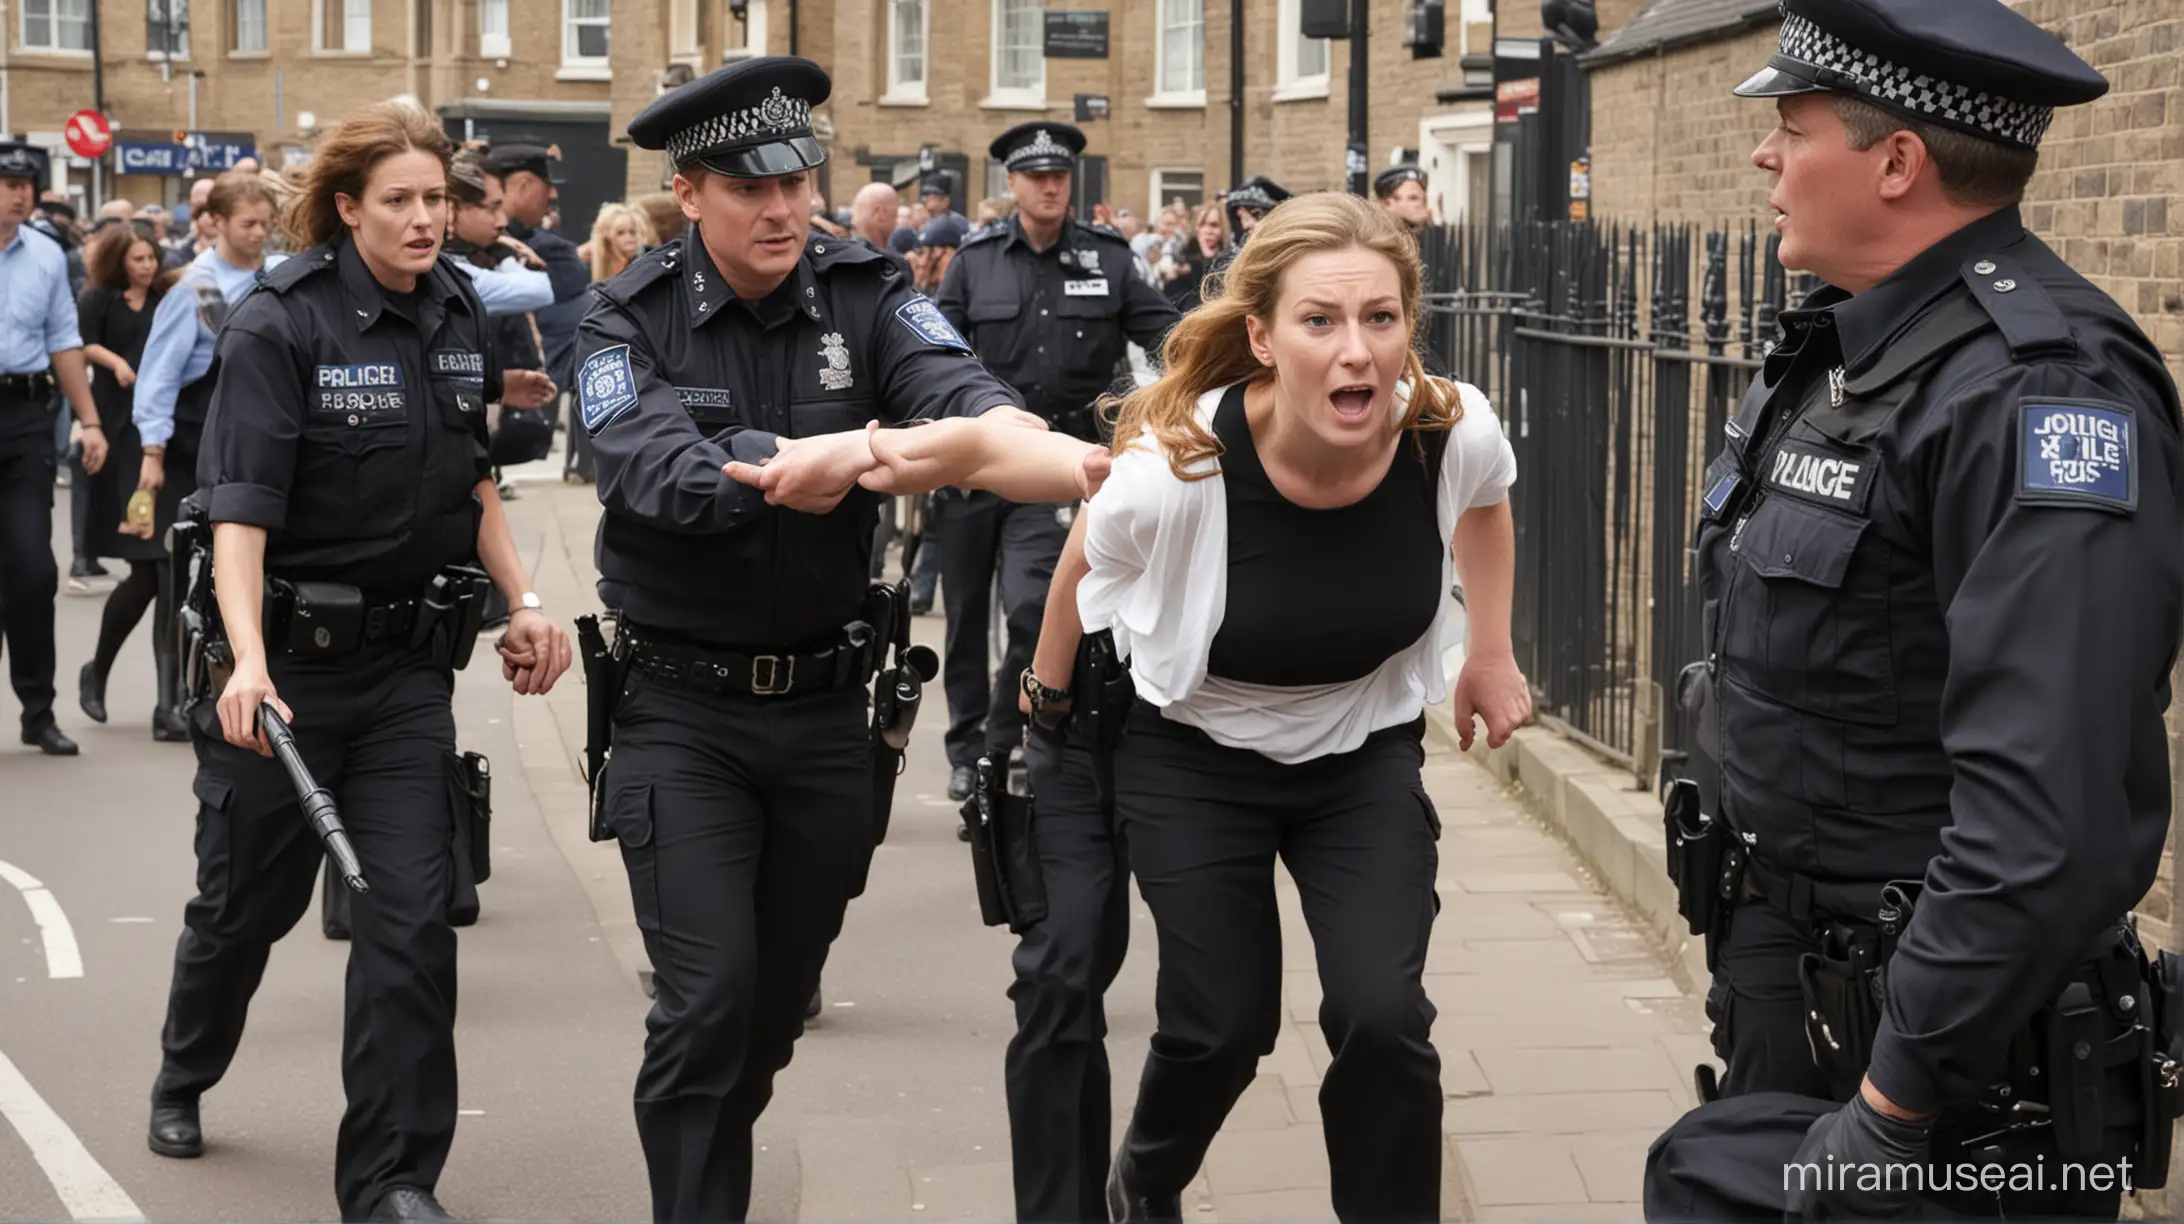 white woman being arrested by british police while another person points at her